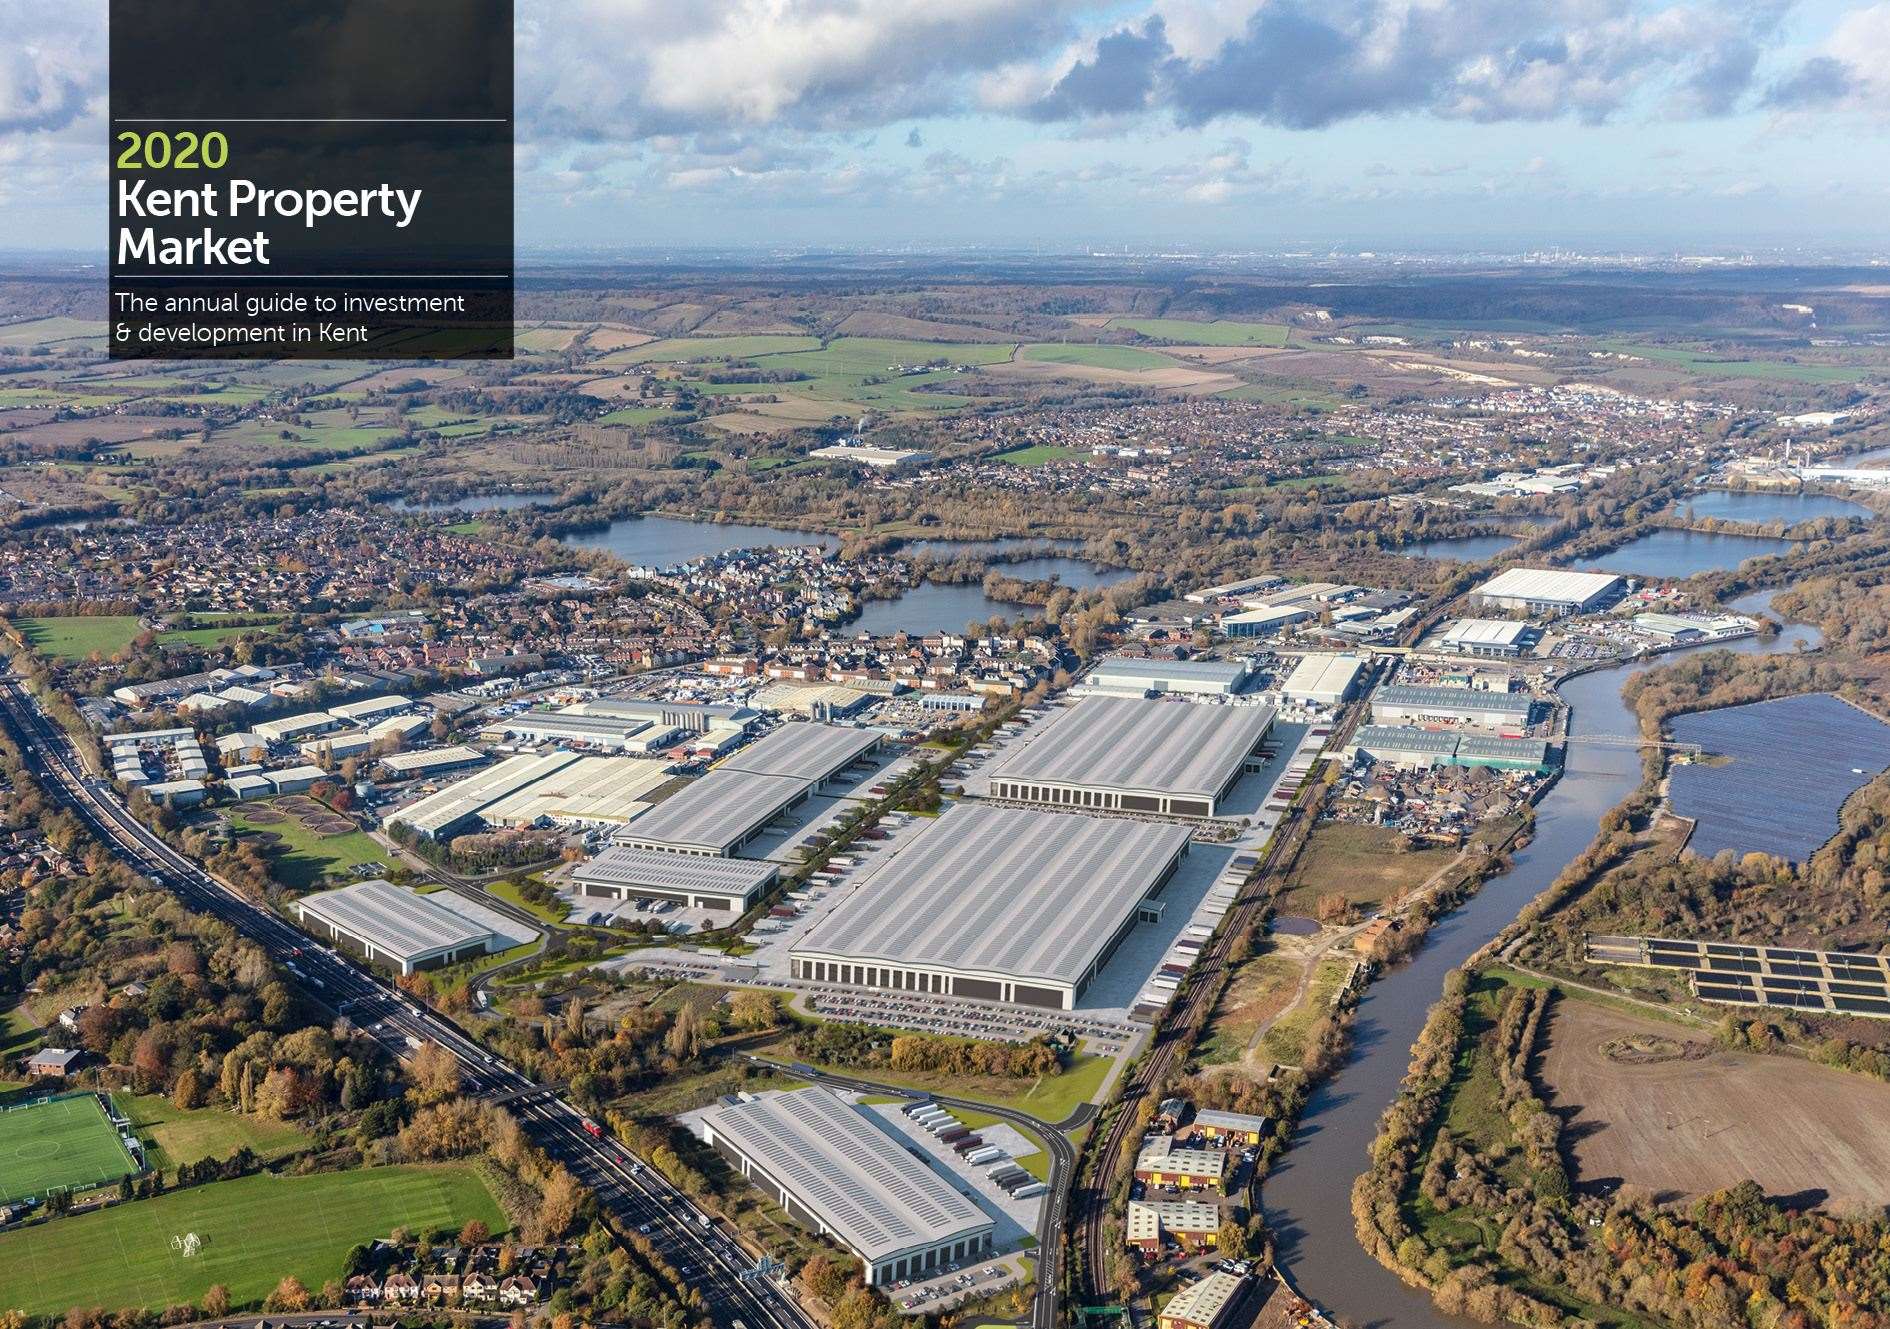 Kent Property Market Report 2020 was unveiled this morning at a virtual event attended by 350 experts